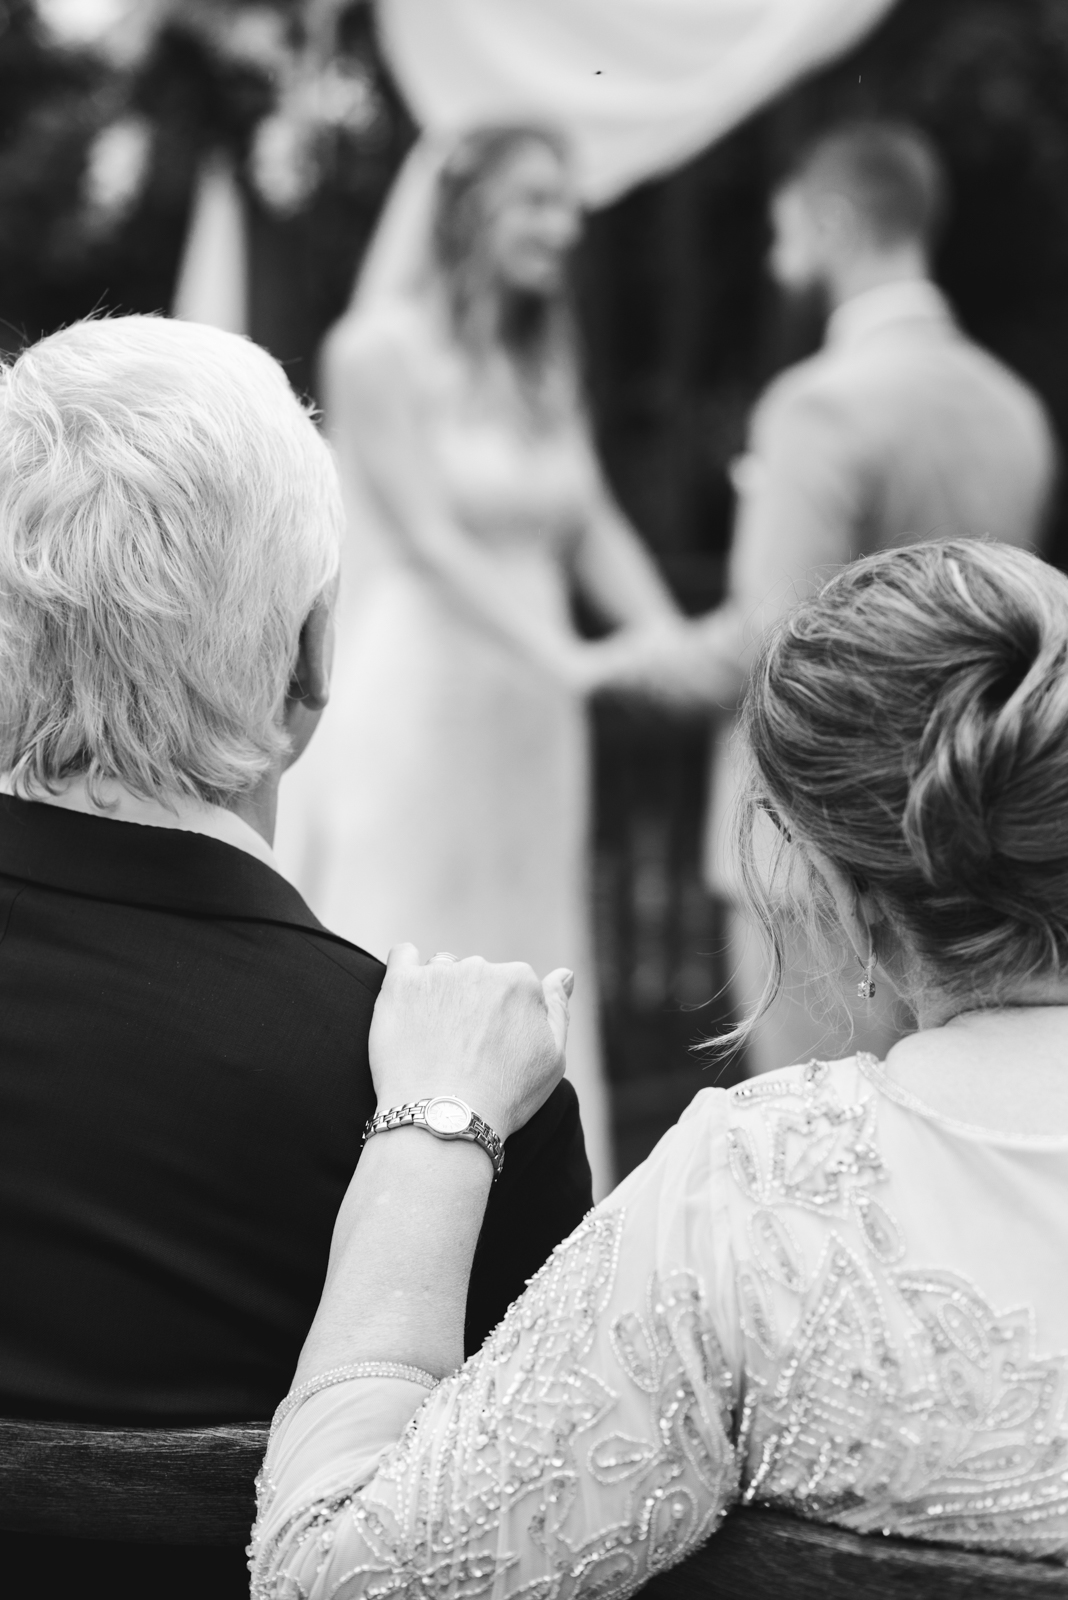 bride's parents watching wedding ceremony in black and white